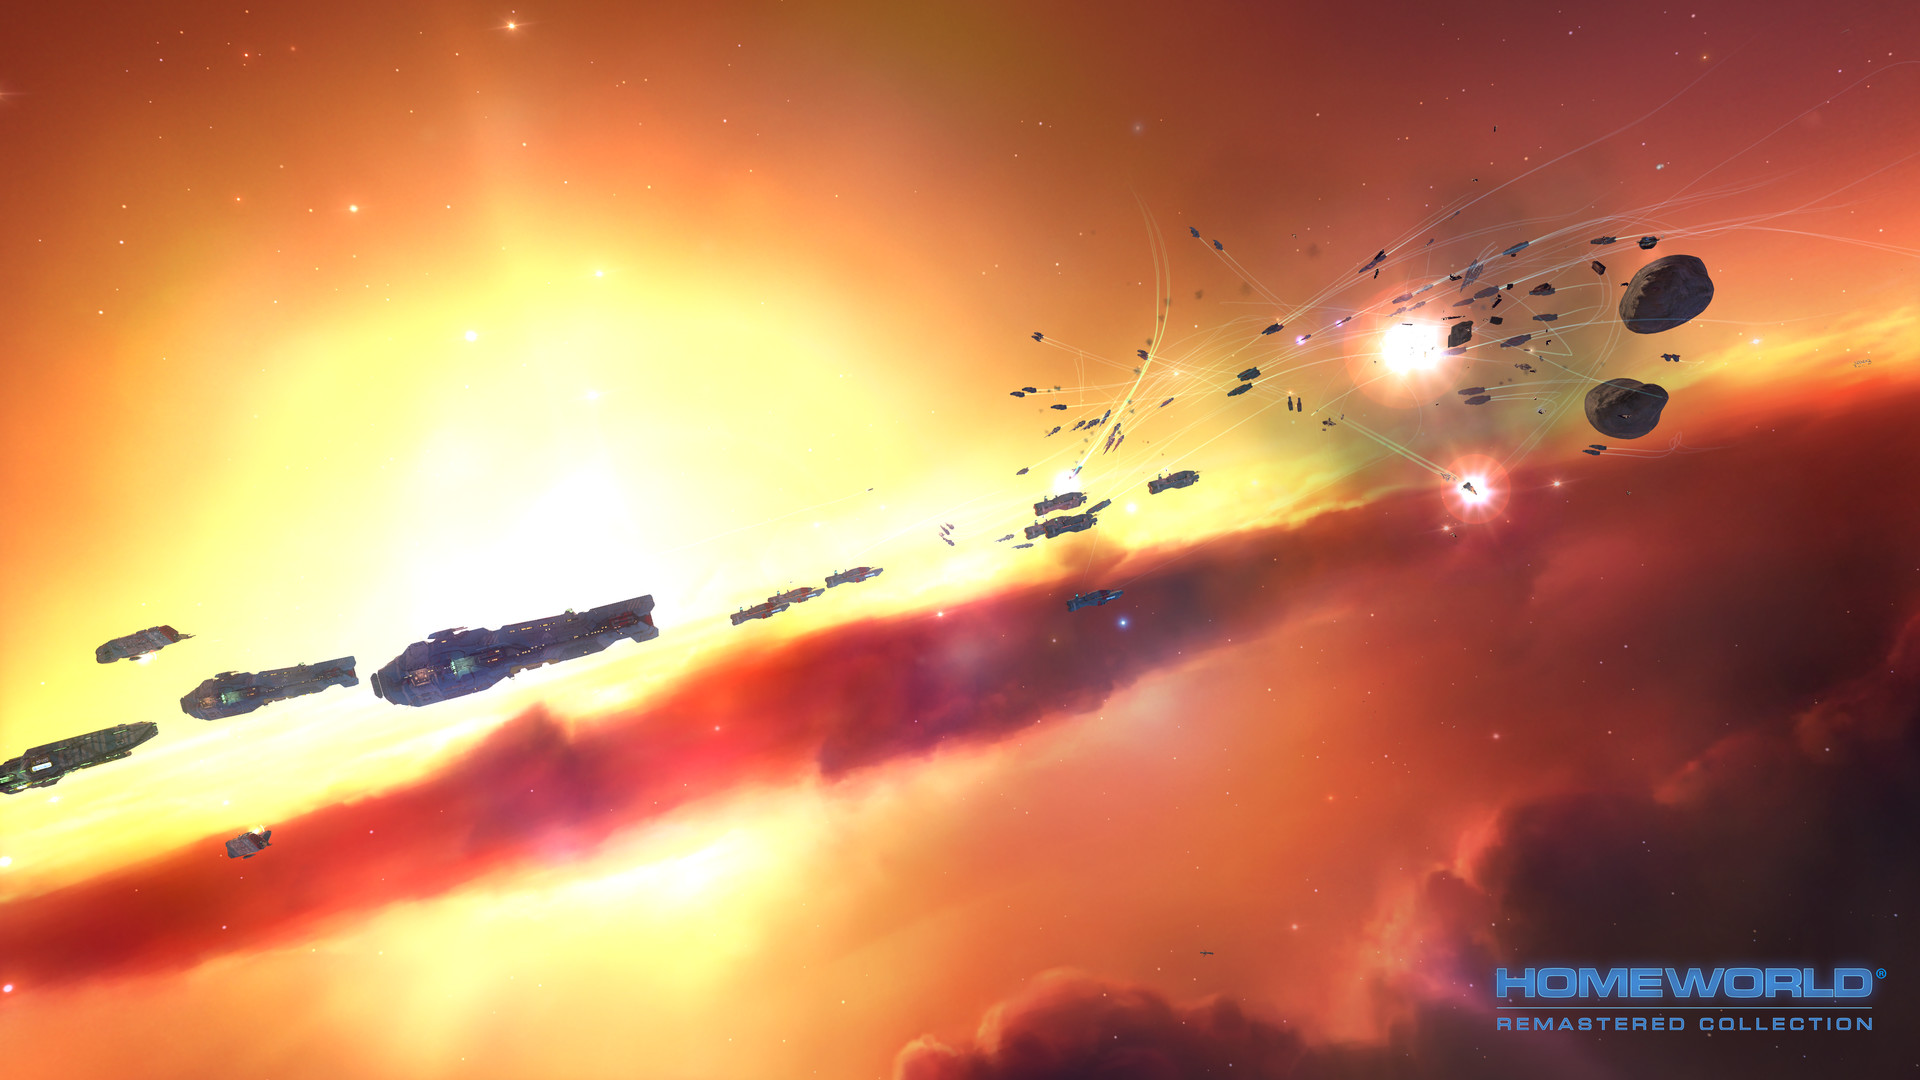 Homeworld Remastered Collection Images 